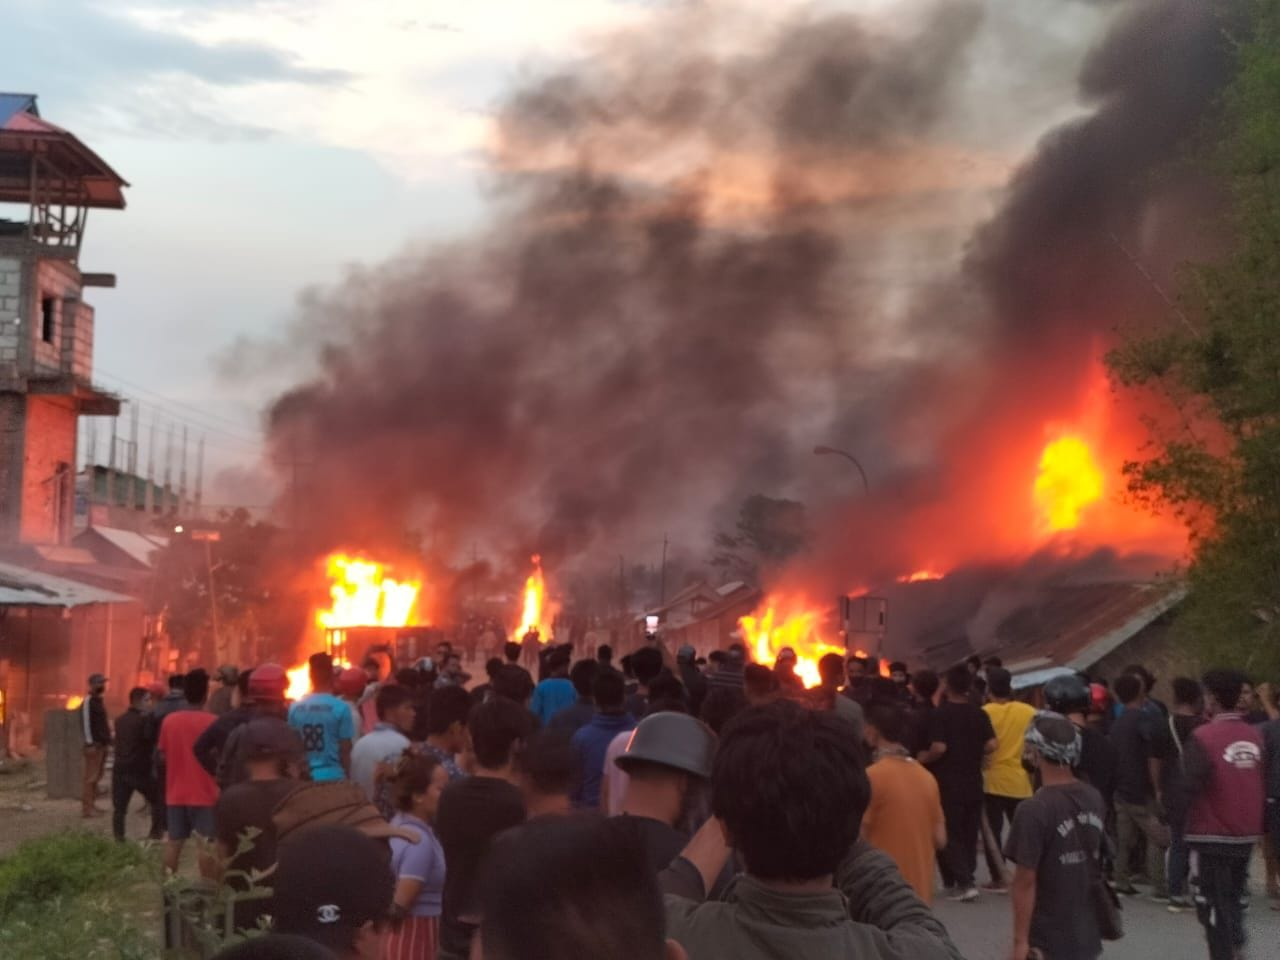 TRAC Incident Report: Ethnic Tensions Spark Violent Protests Across Manipur, India - 3 May 2023